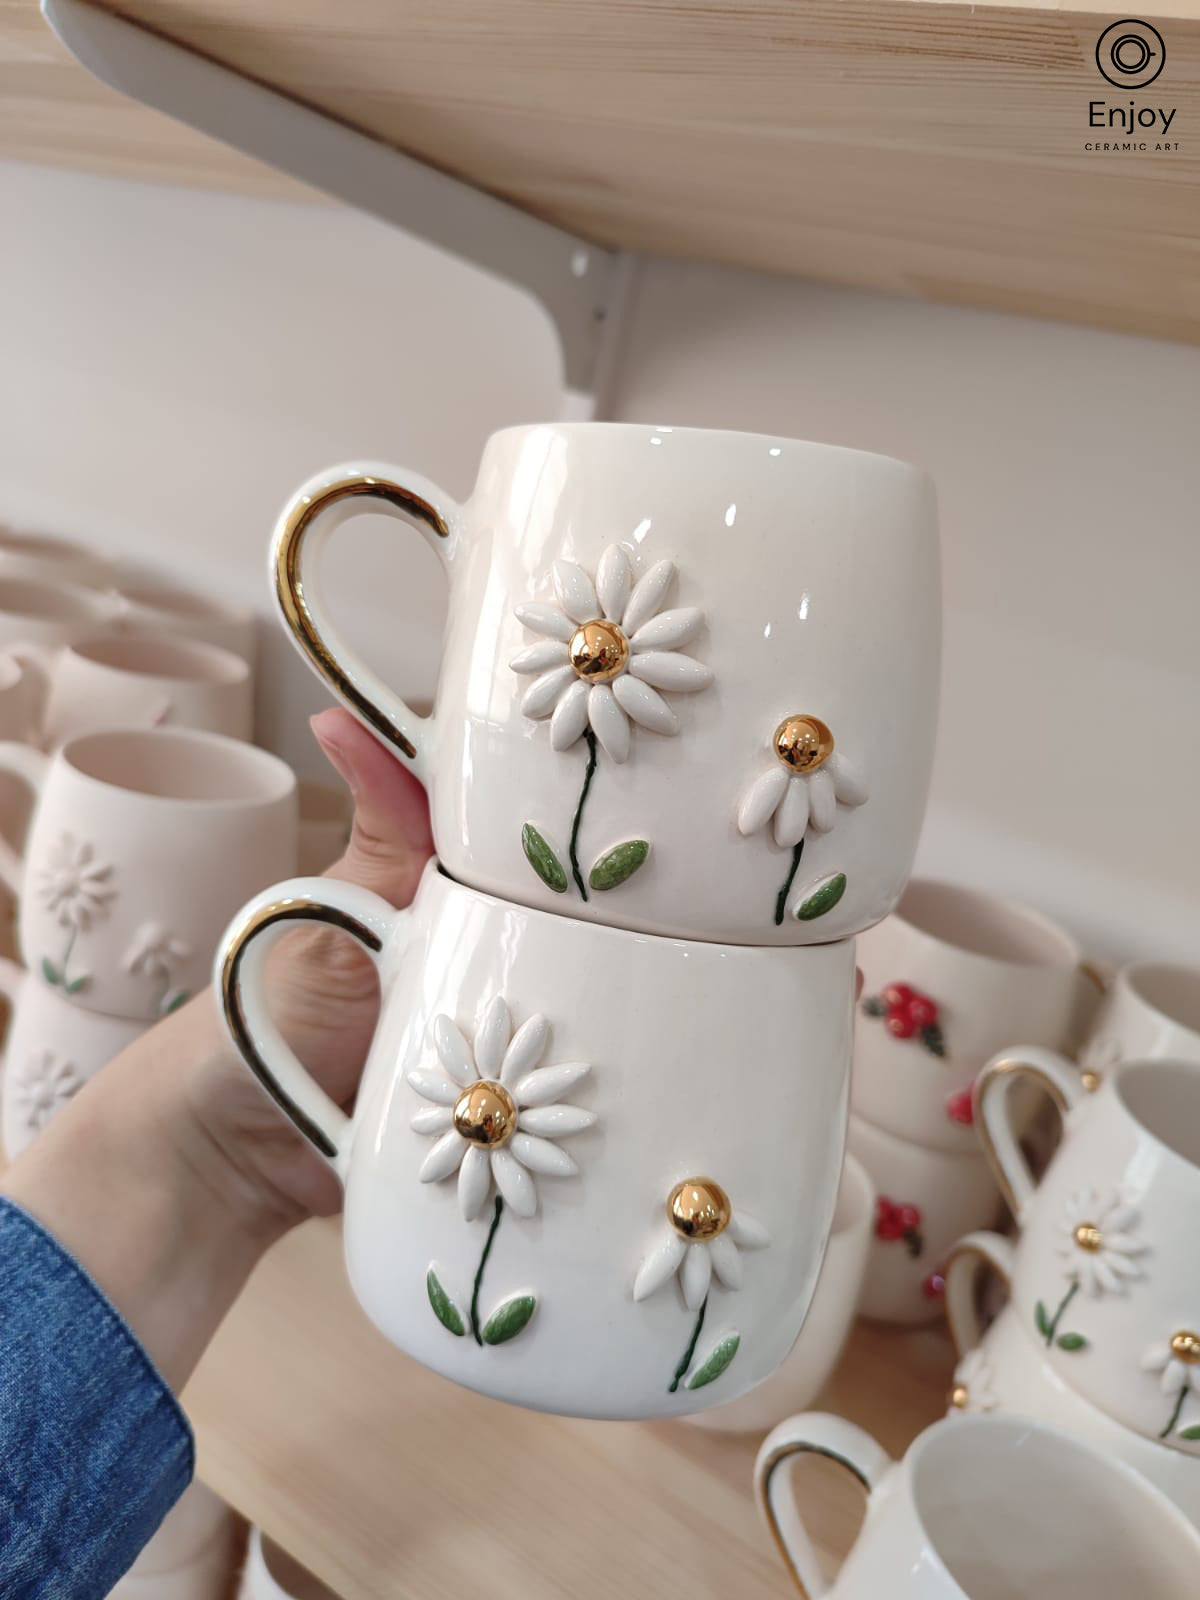 Handmade daisy mug with gold handle and gold center